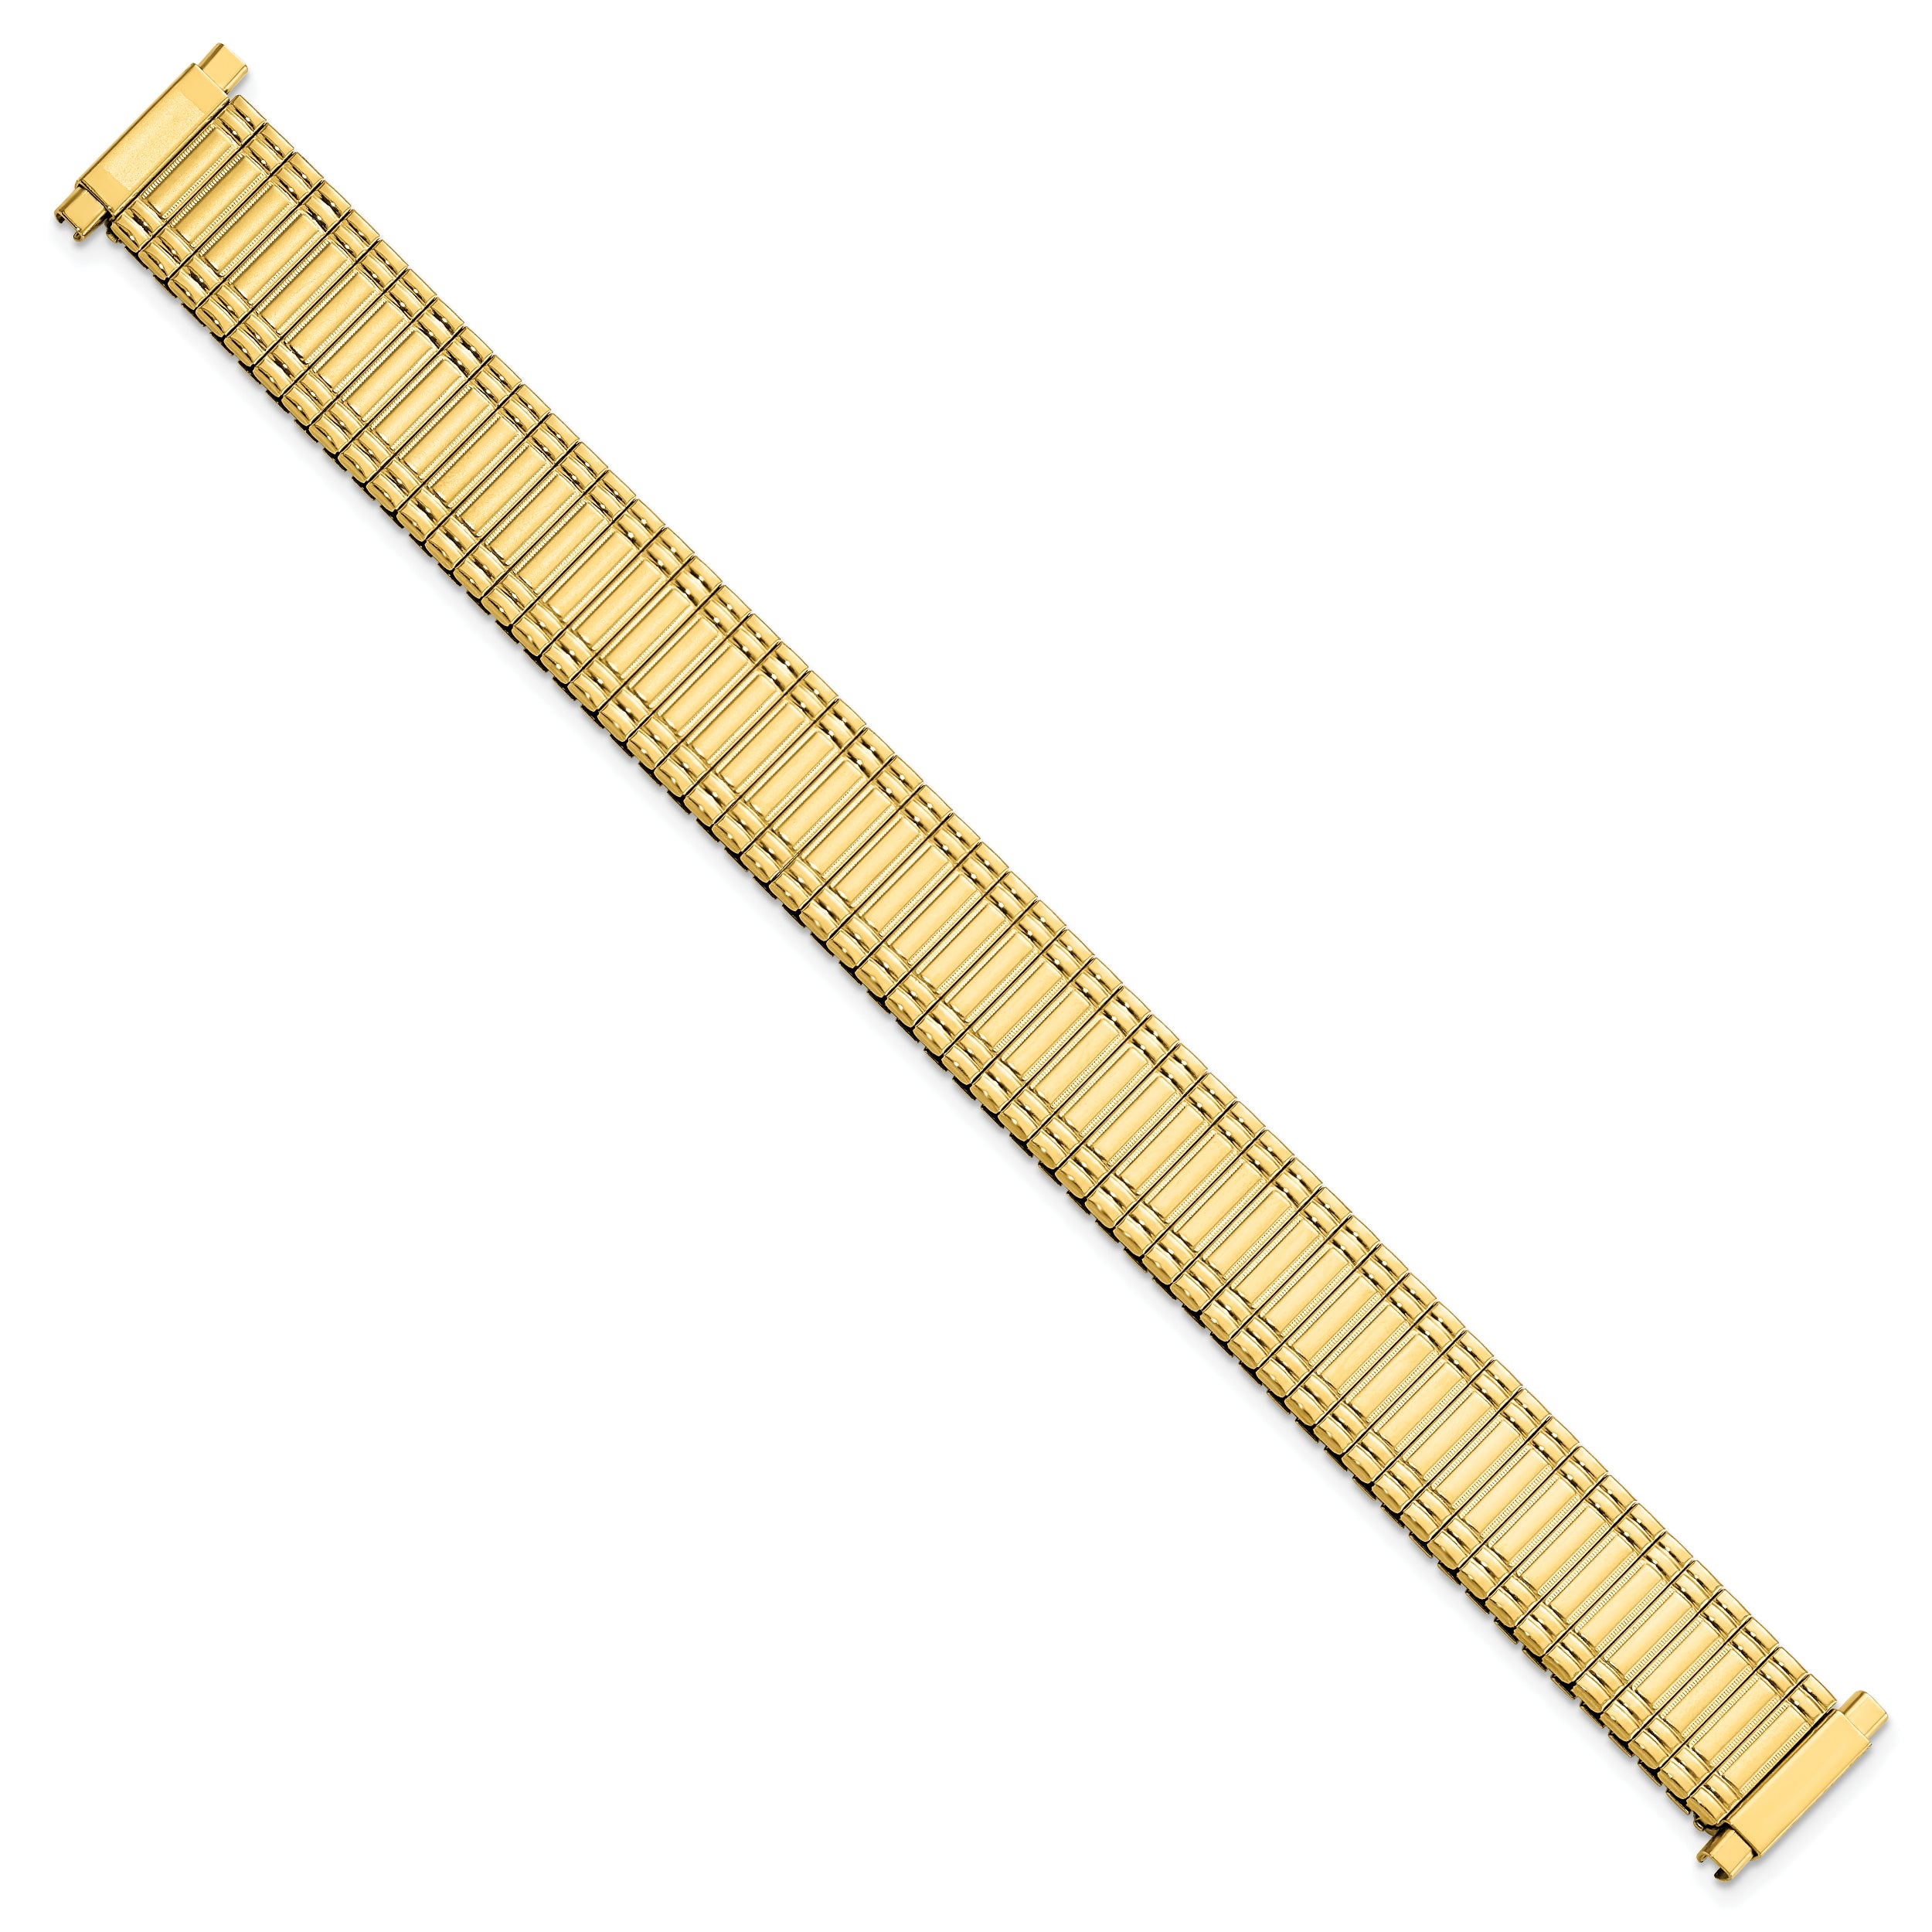 11-15mm Ladies Sanded and Polished Gold-tone Stainless Steel Thin-Flexo Expansion Link 6 inch Watch Band